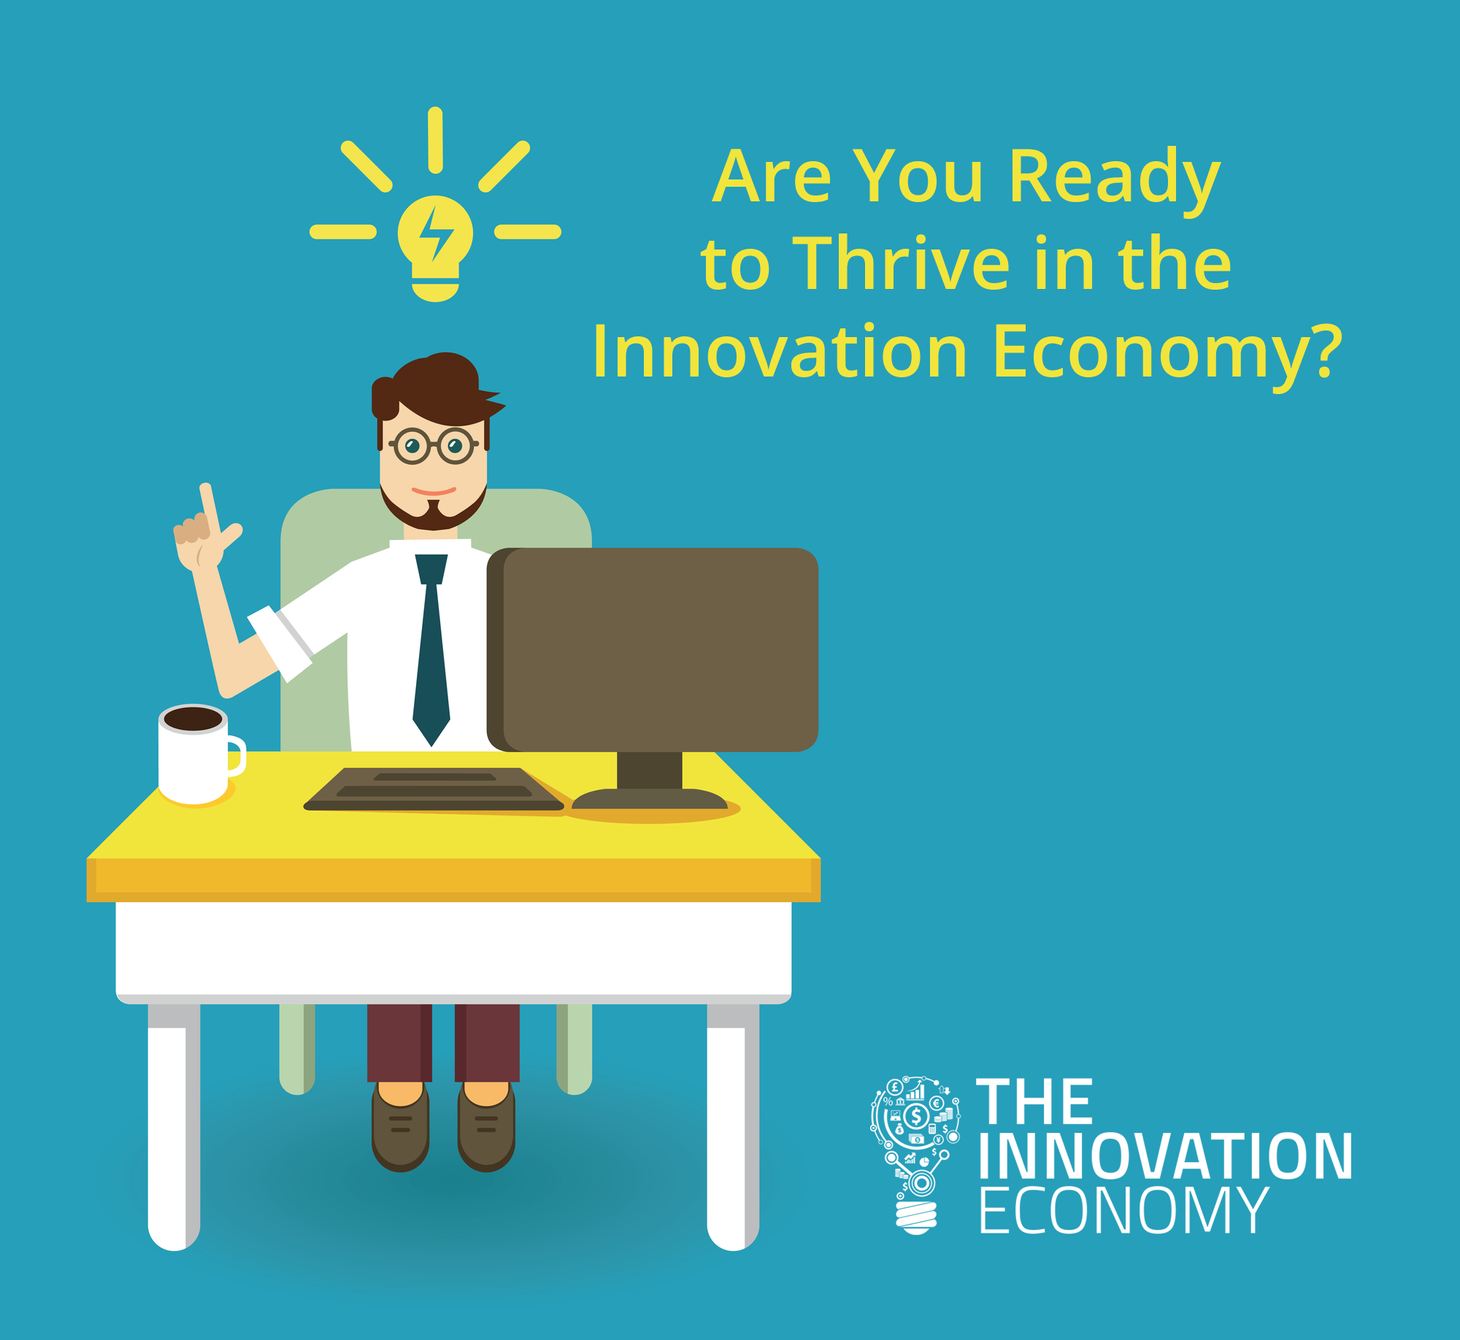 Are You Ready to Thrive in the Innovation Economy?